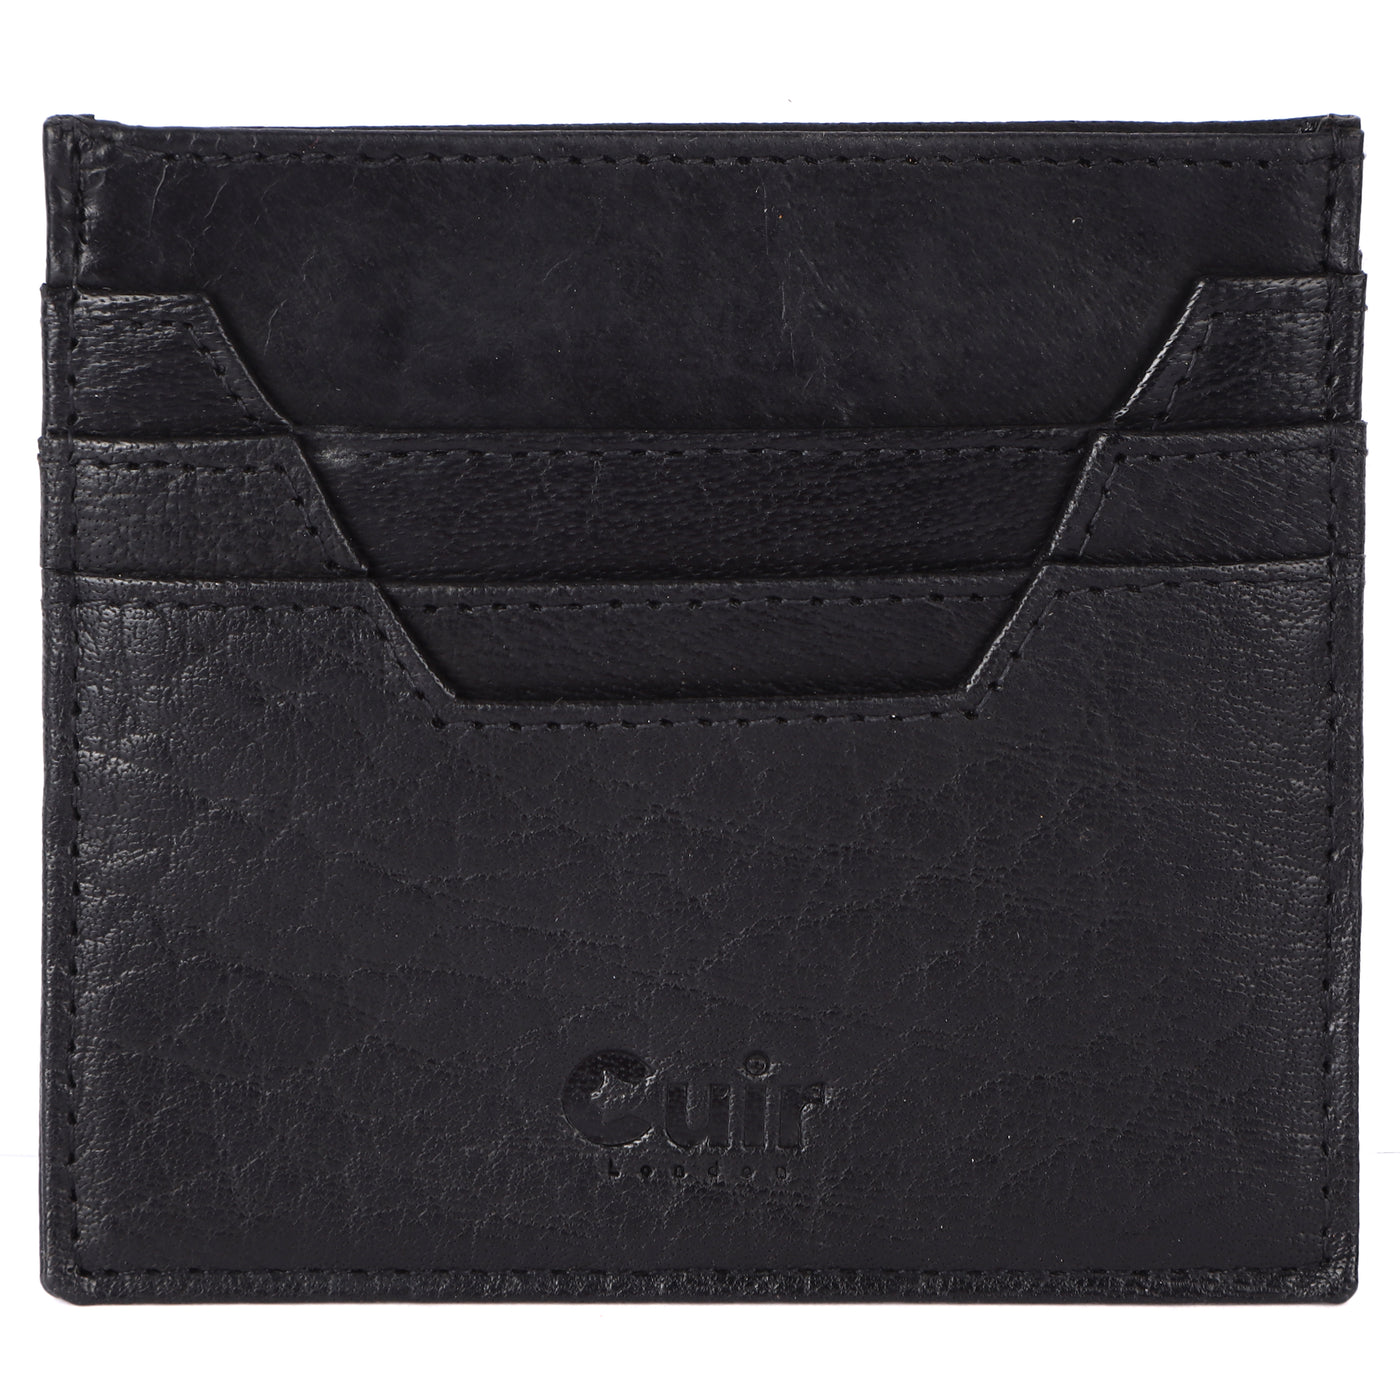 Premium Black Leather Card Case with 6 Pockets